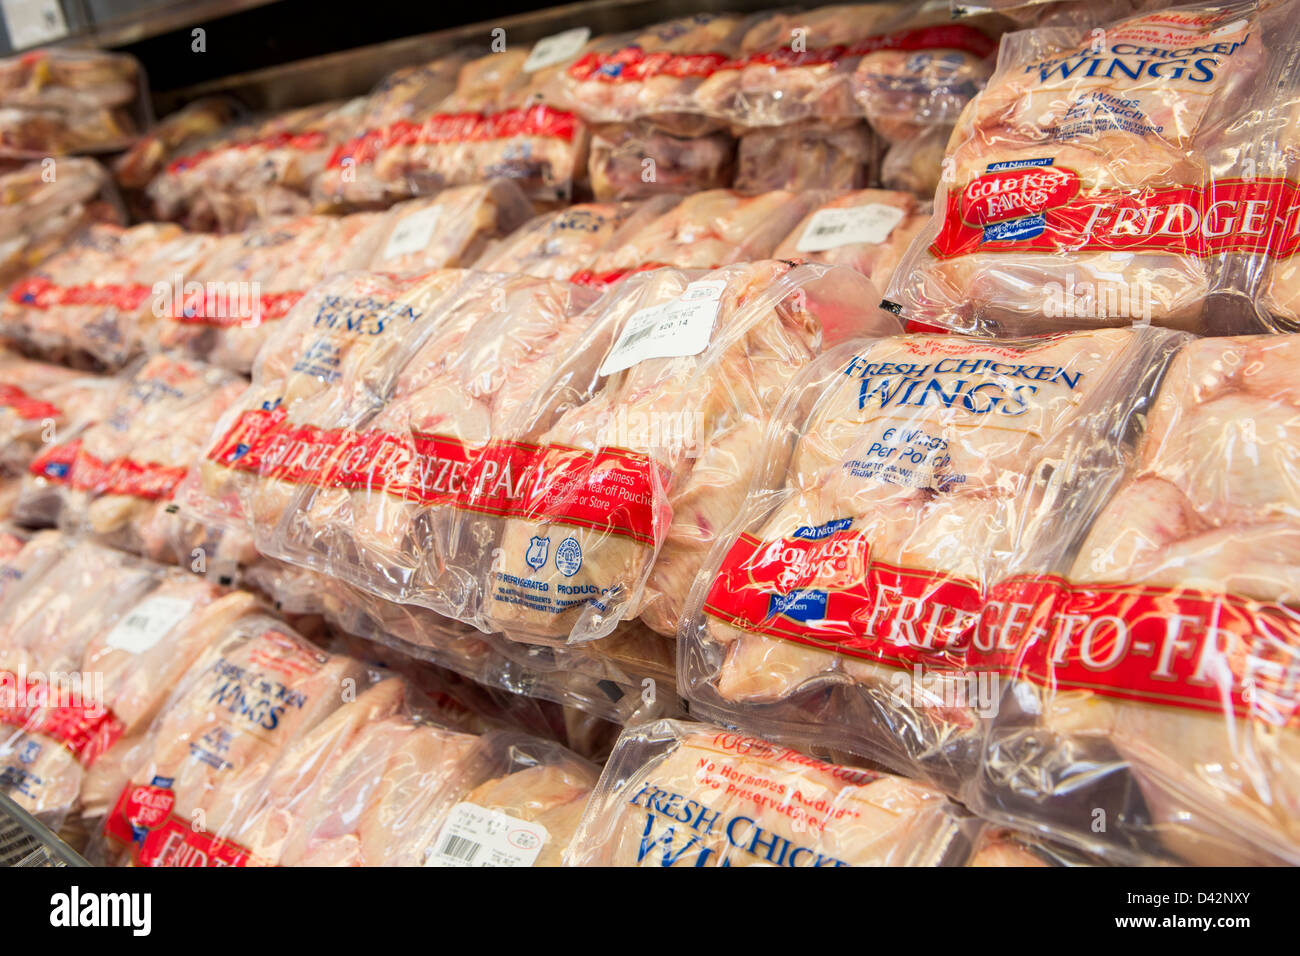 Chicken wings on display at a Costco Wholesale Warehouse Club. Stock Photo